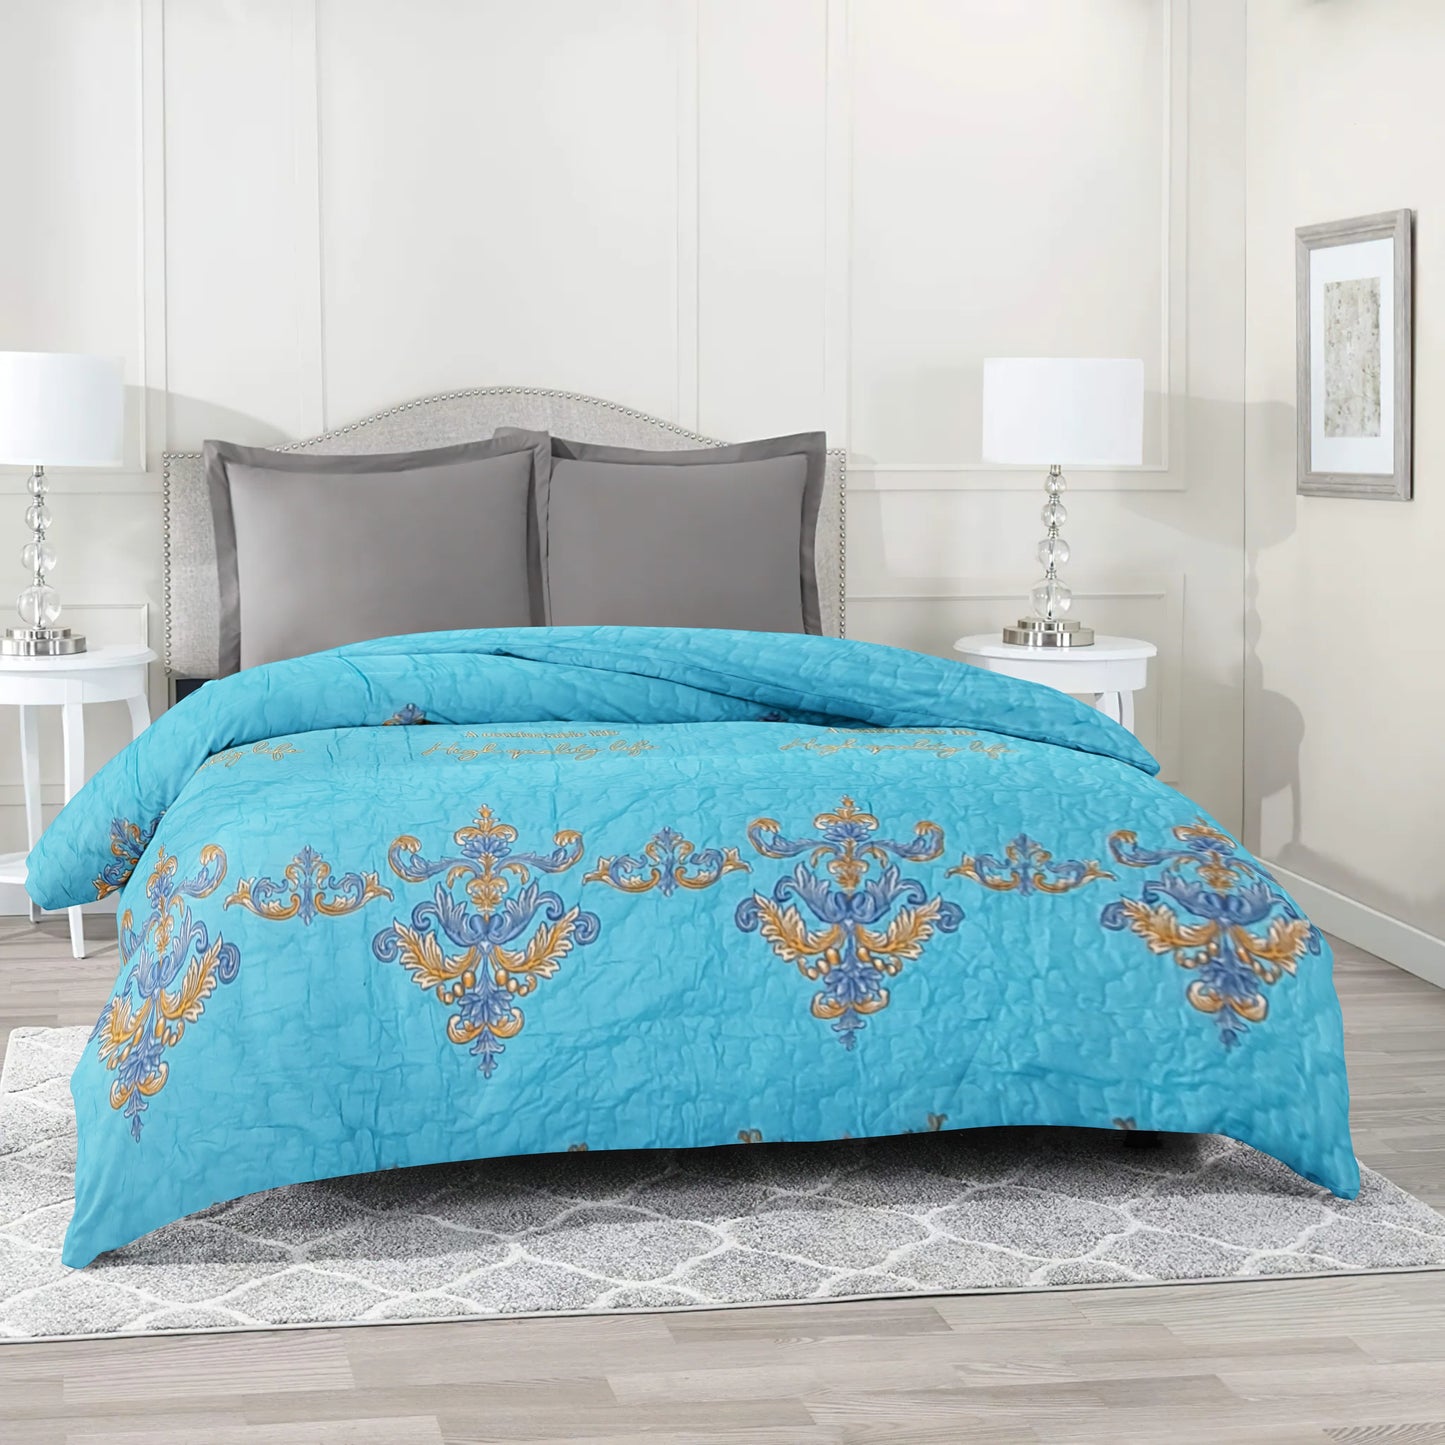 All Weather Quilted Comforter Set Soft and Plush Large Royal Crown Print on Sea Green